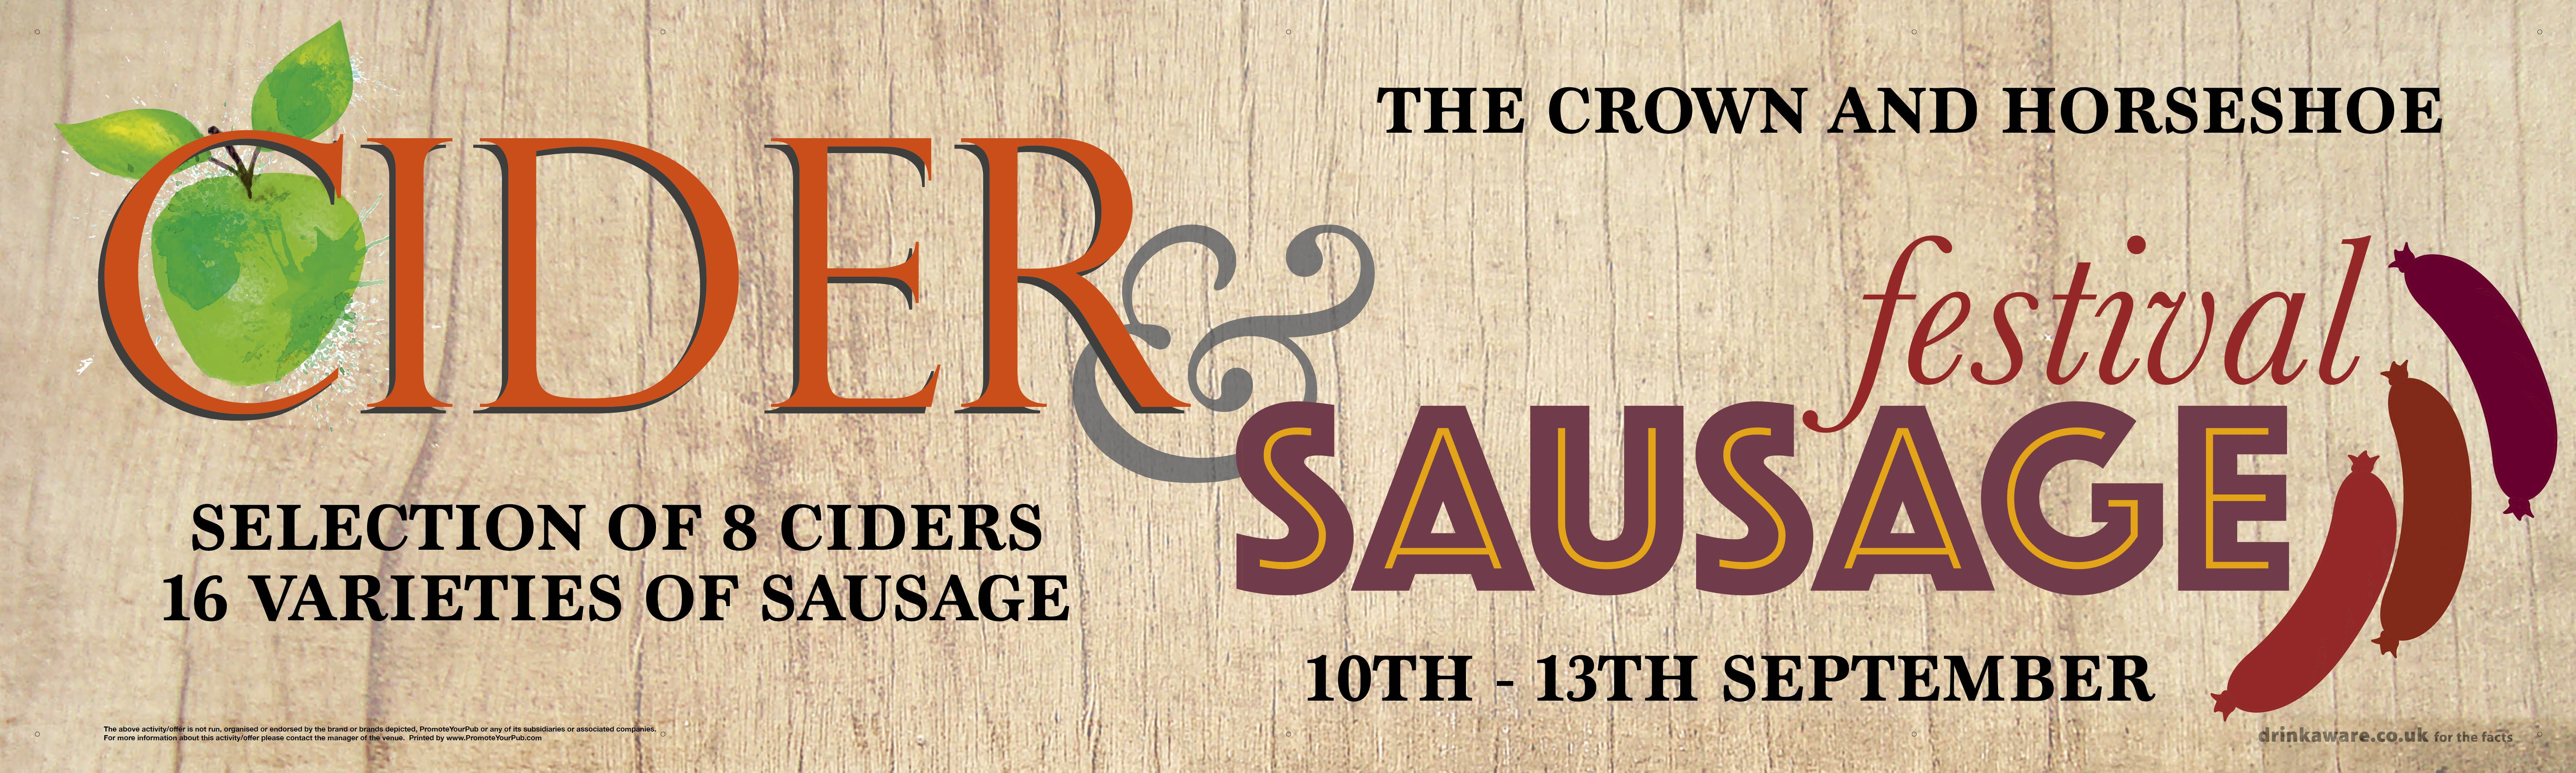 Cider and Sausage Festival Banner (XL10')